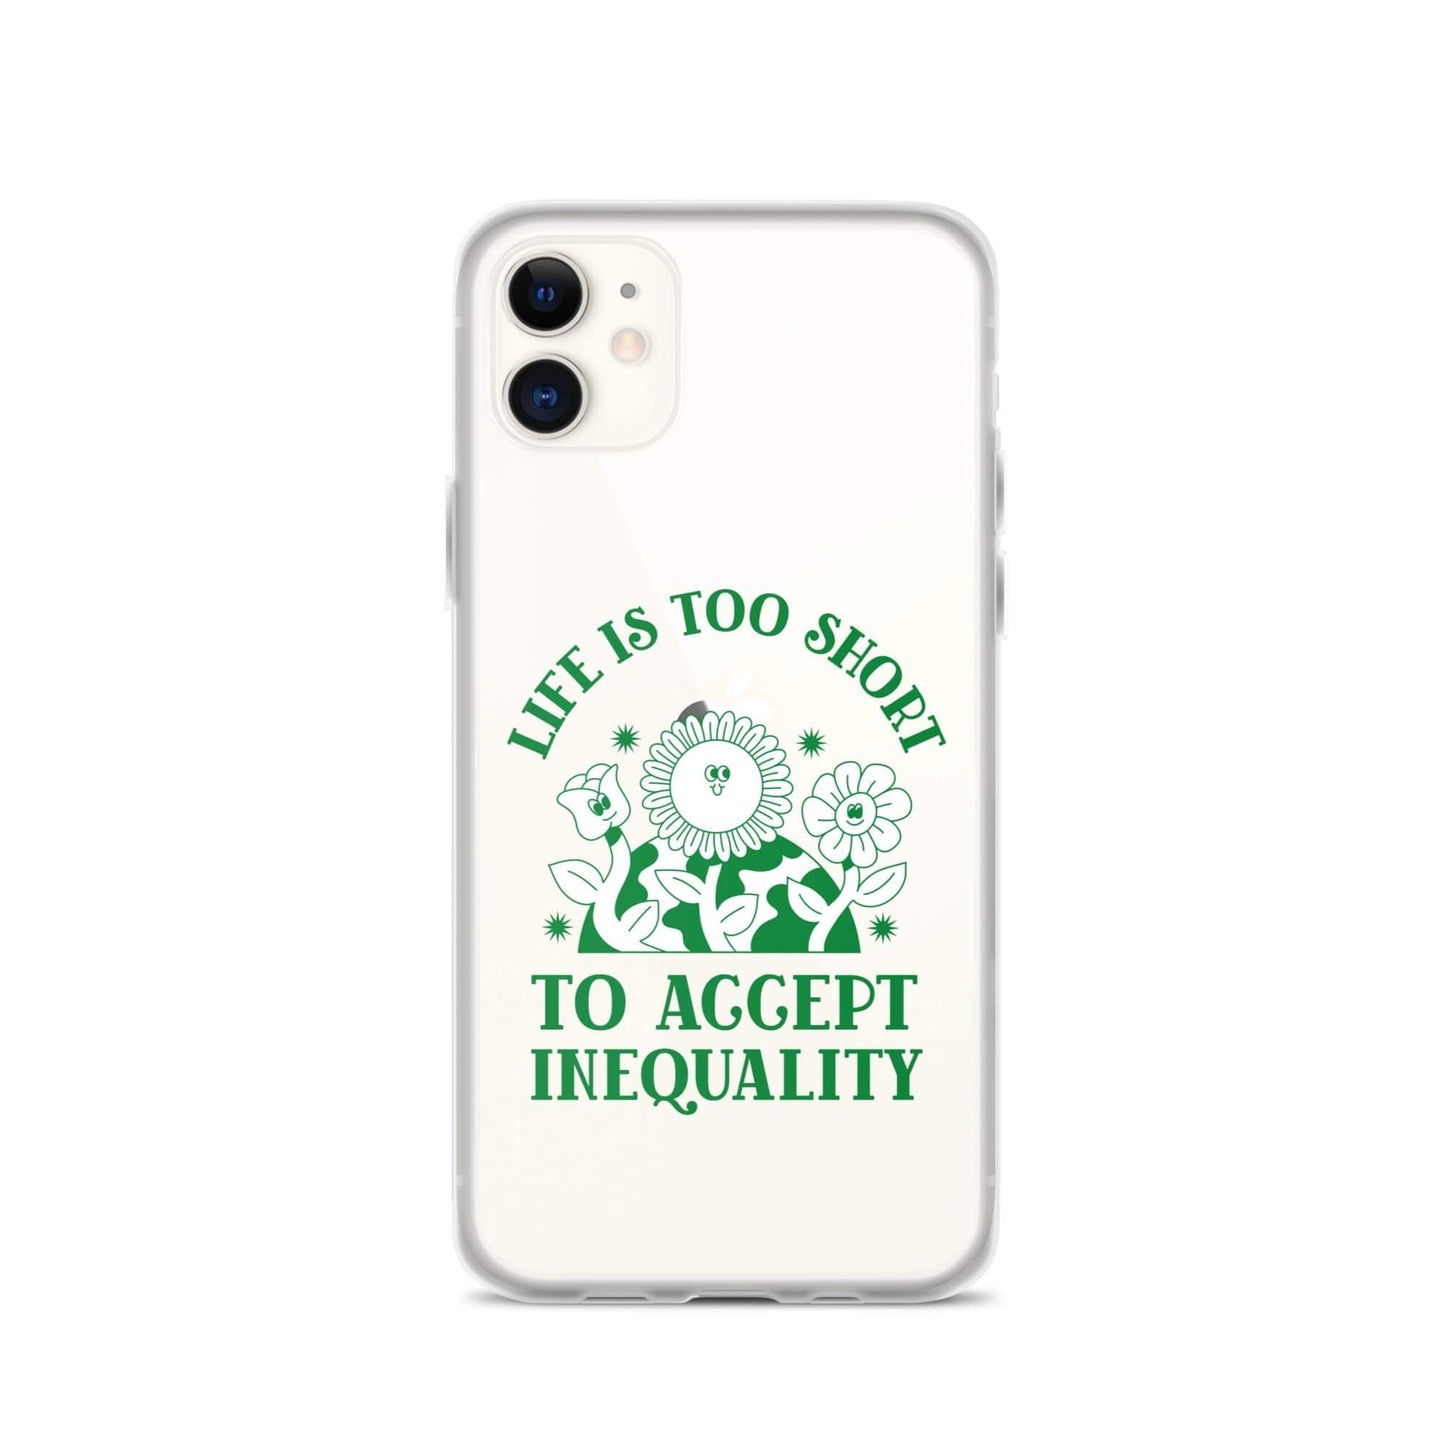 phone-cover-feminist-clear-case-for-iphone